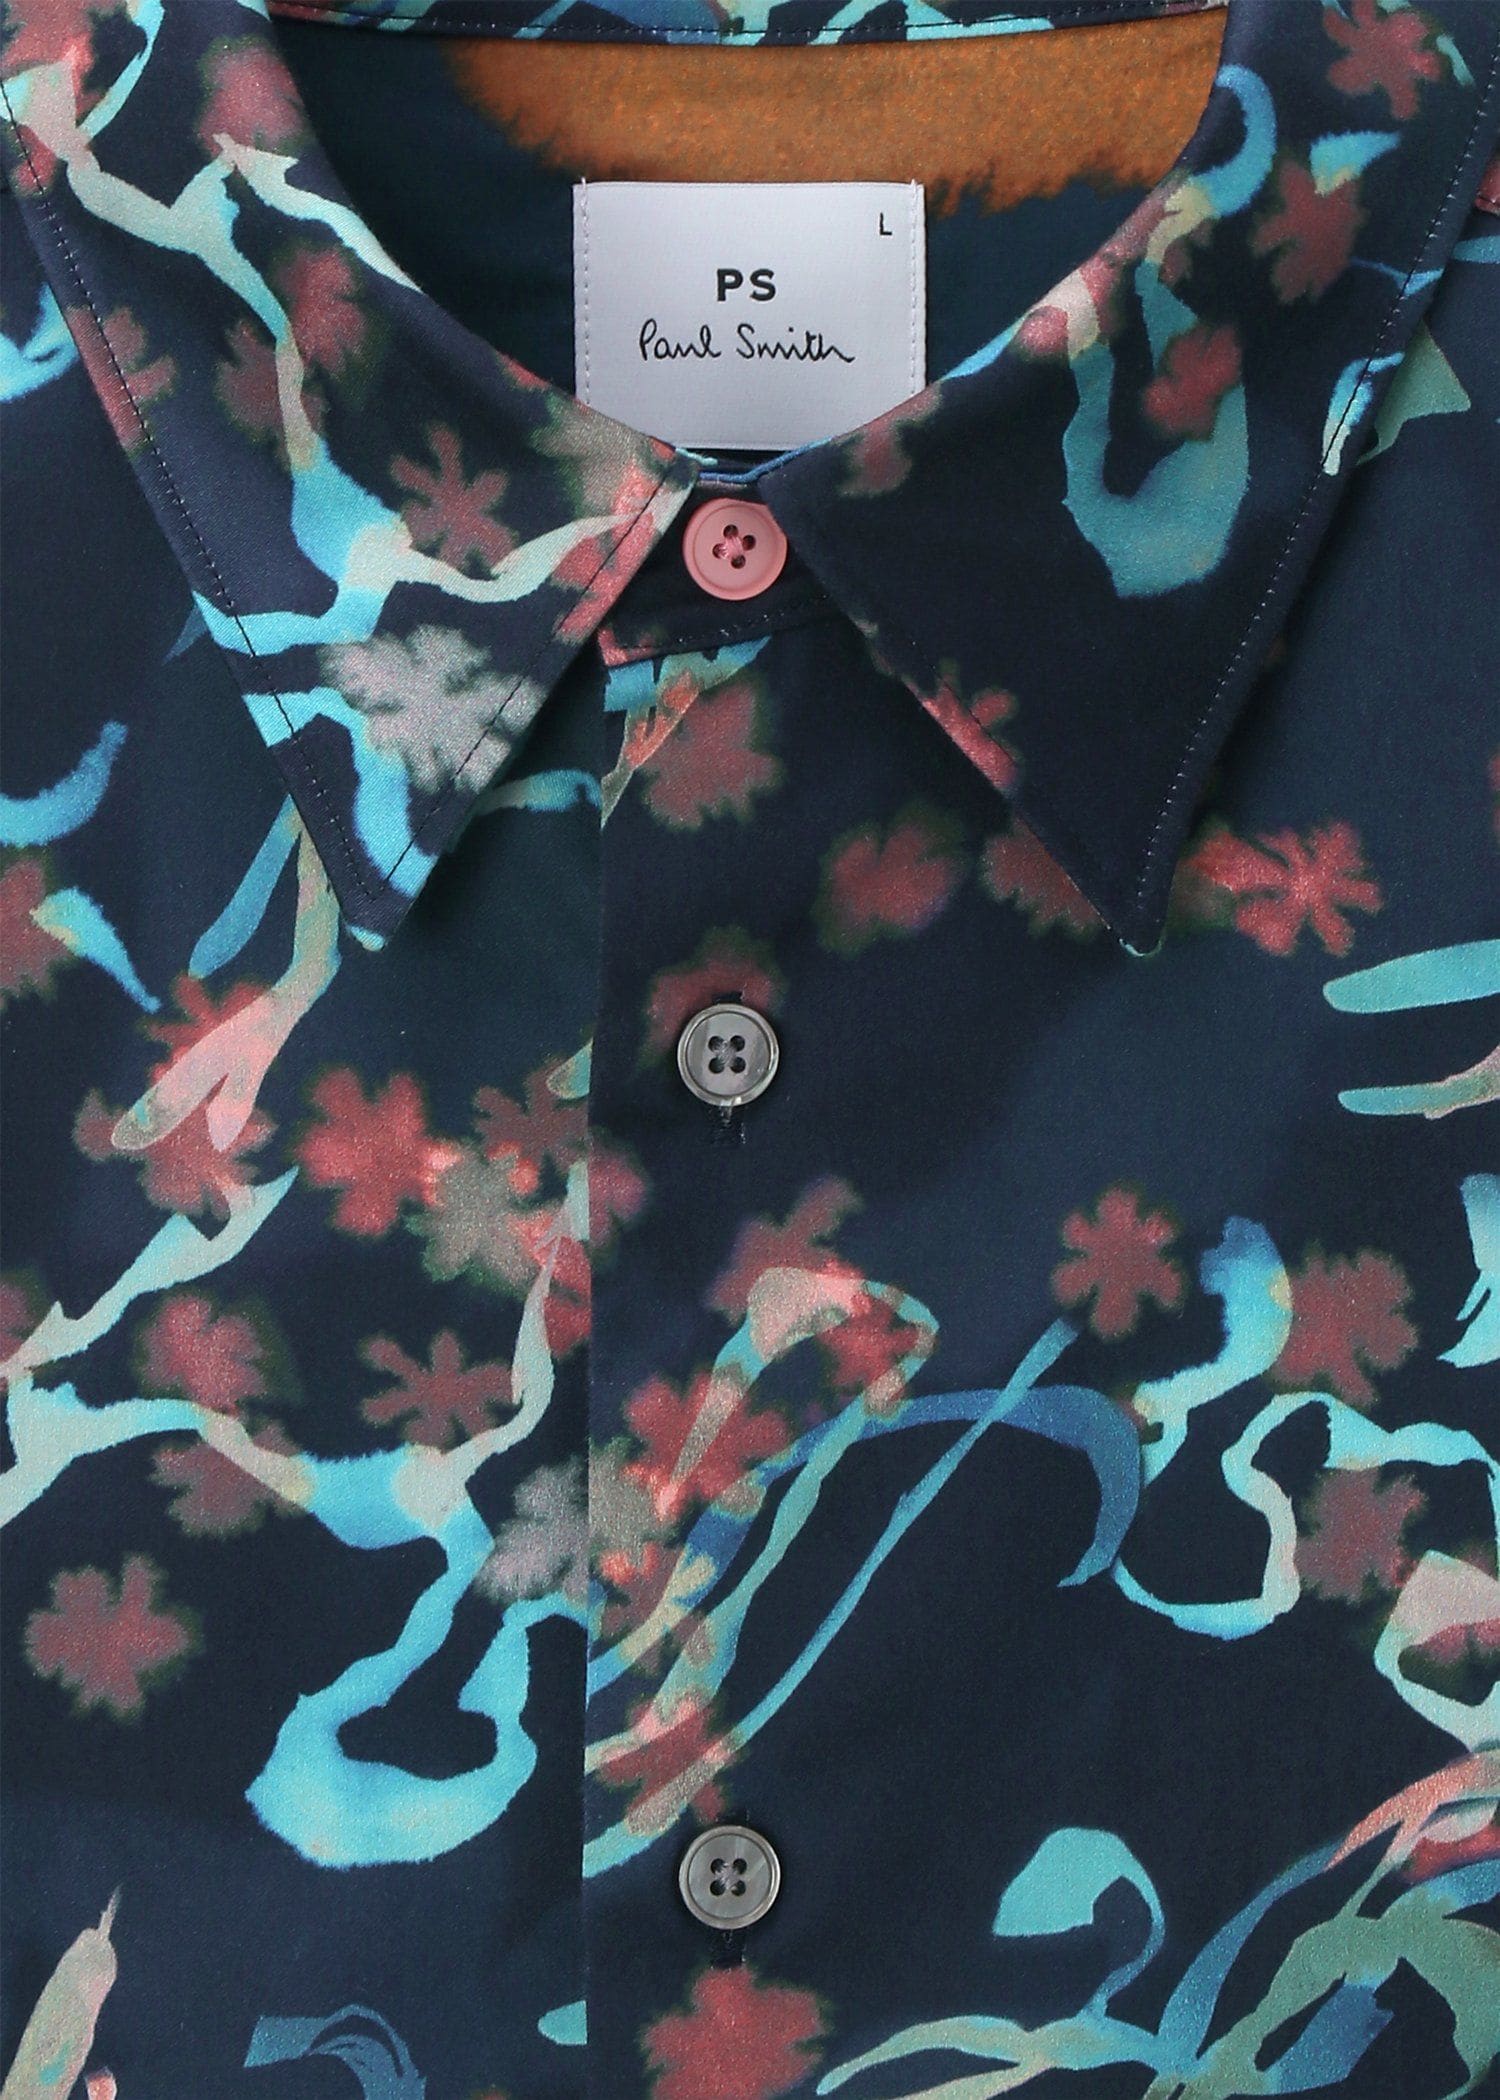 Paul Smith ポールスミス 花柄 MUTED FLORAL シャツ生地コットン - シャツ